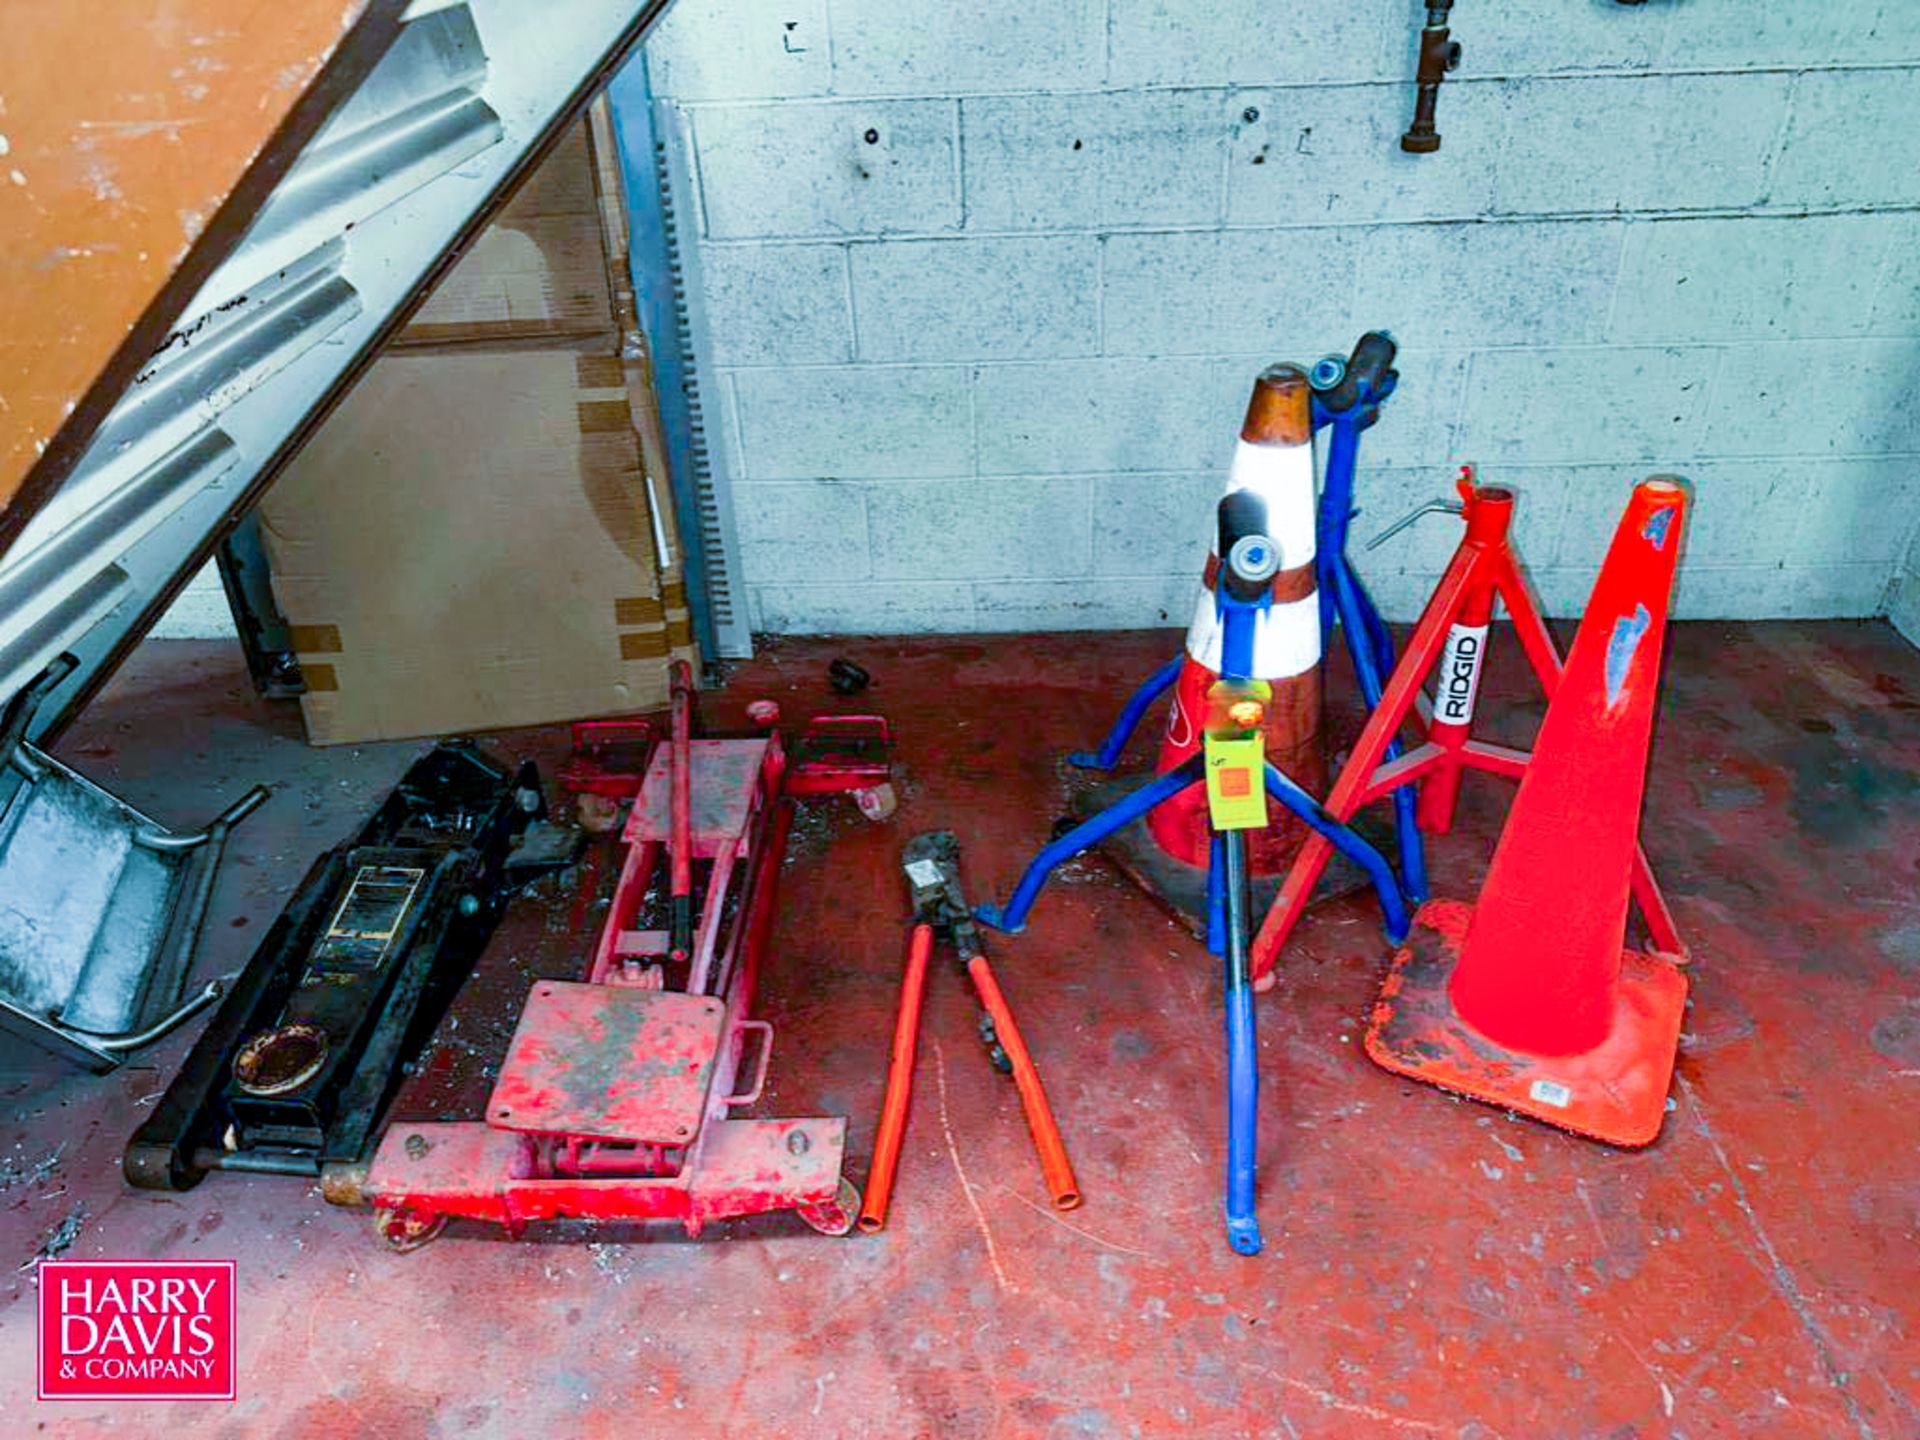 Pipe Stands, Floor Jacks and Safety Cones - Rigging Fee: $75